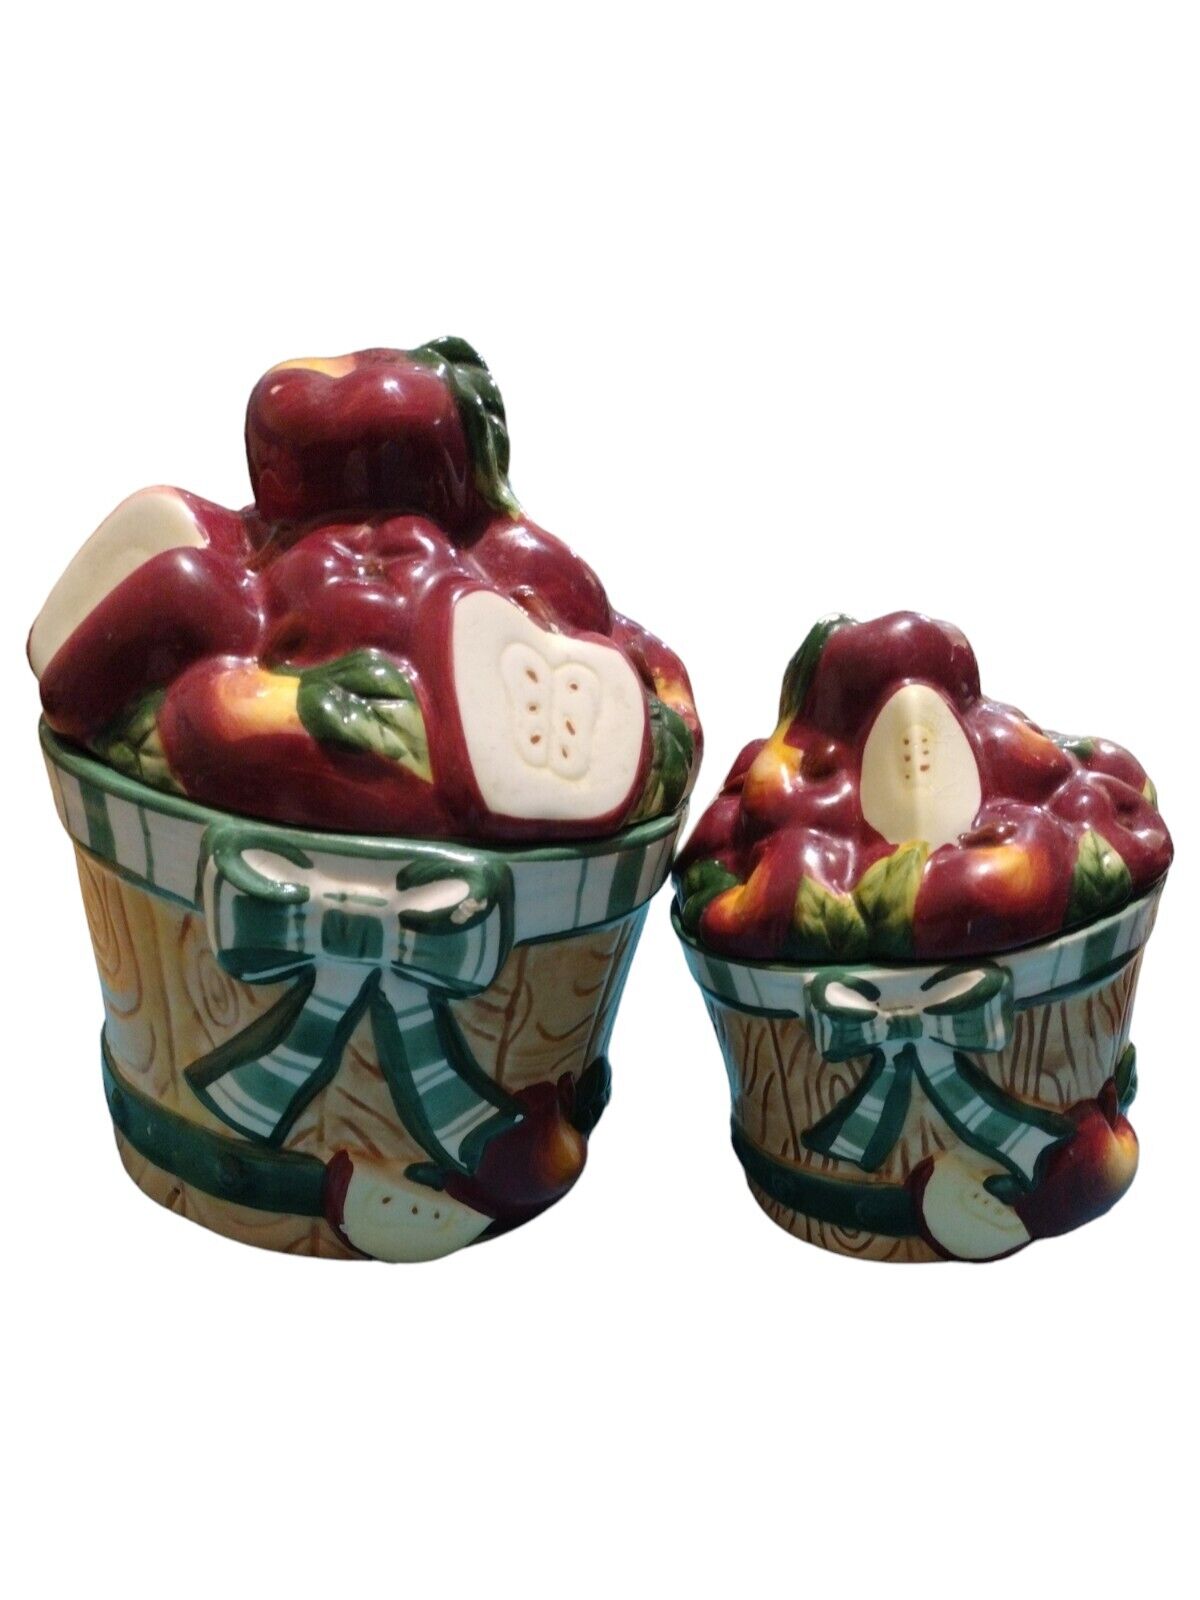 Two 1999 Young's Exclusive Apple Basket Kitchen Canister with Lid READ